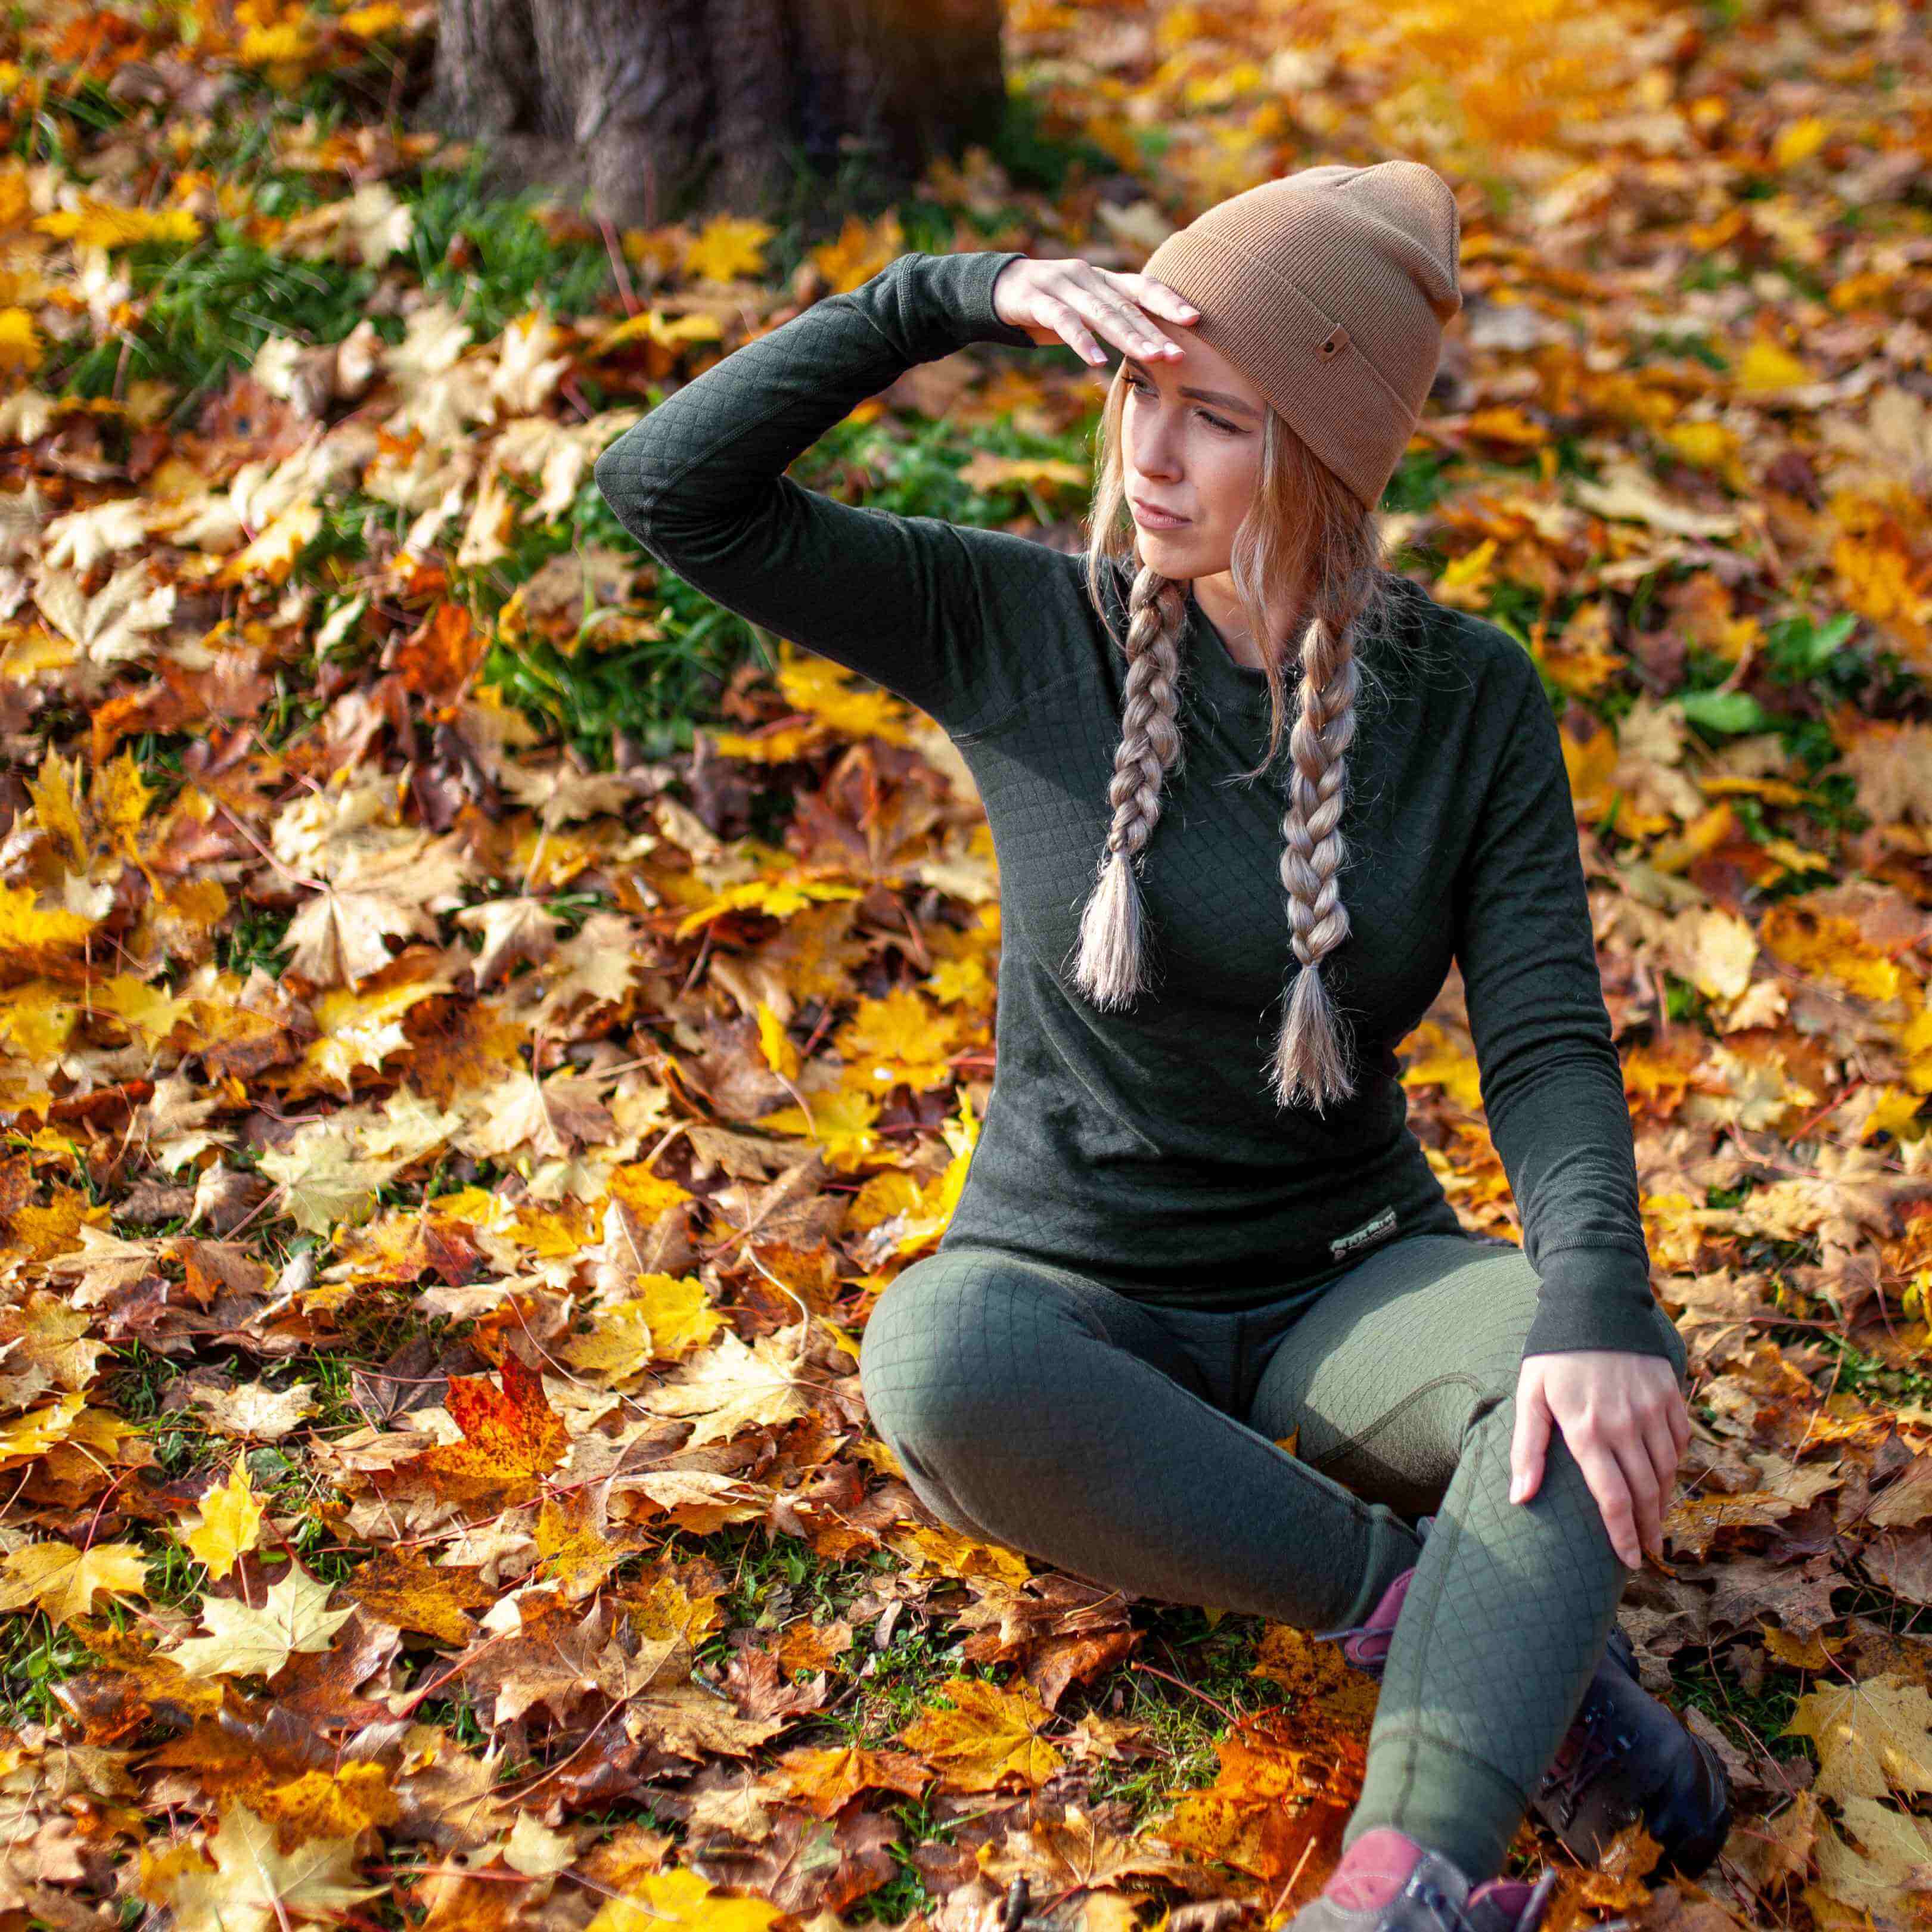 a-woman-in-thermal-clothing-sits-on-a-ground-among-fallen-leaves-in-autumn